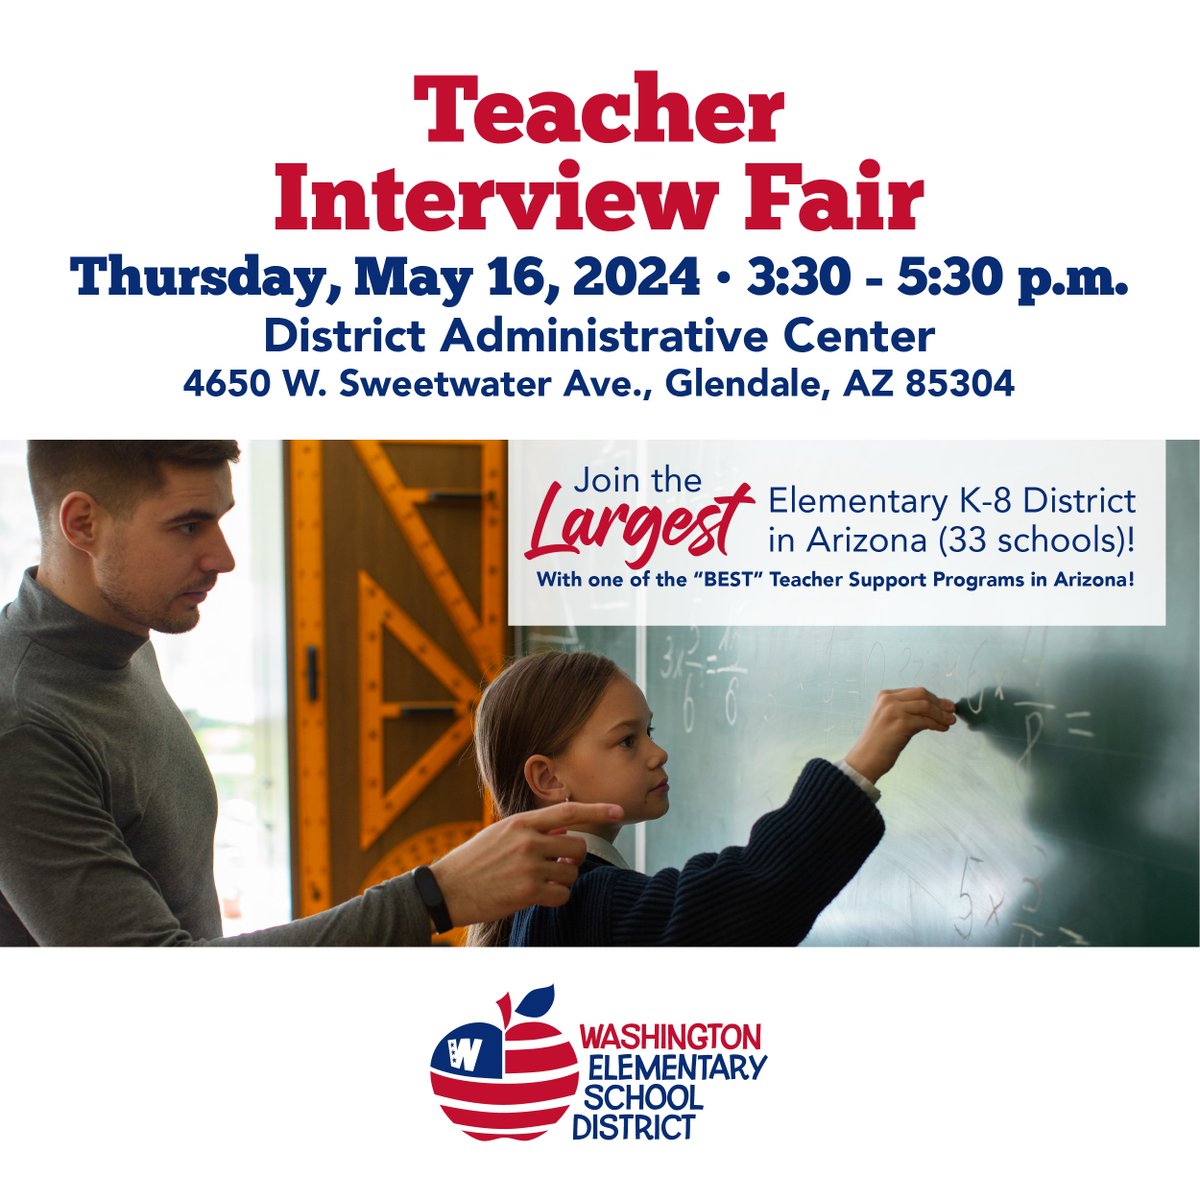 Don't forget! Our Teacher Interview Fair is tomorrow, May 16, from 3:30 to 5:30 p.m. at the WESD Administrative Center! Those interested can still preschedule an interview by calling 602-347-2622 or emailing Teach@wesdschools.org. We hope to see you there! #WESDFamily